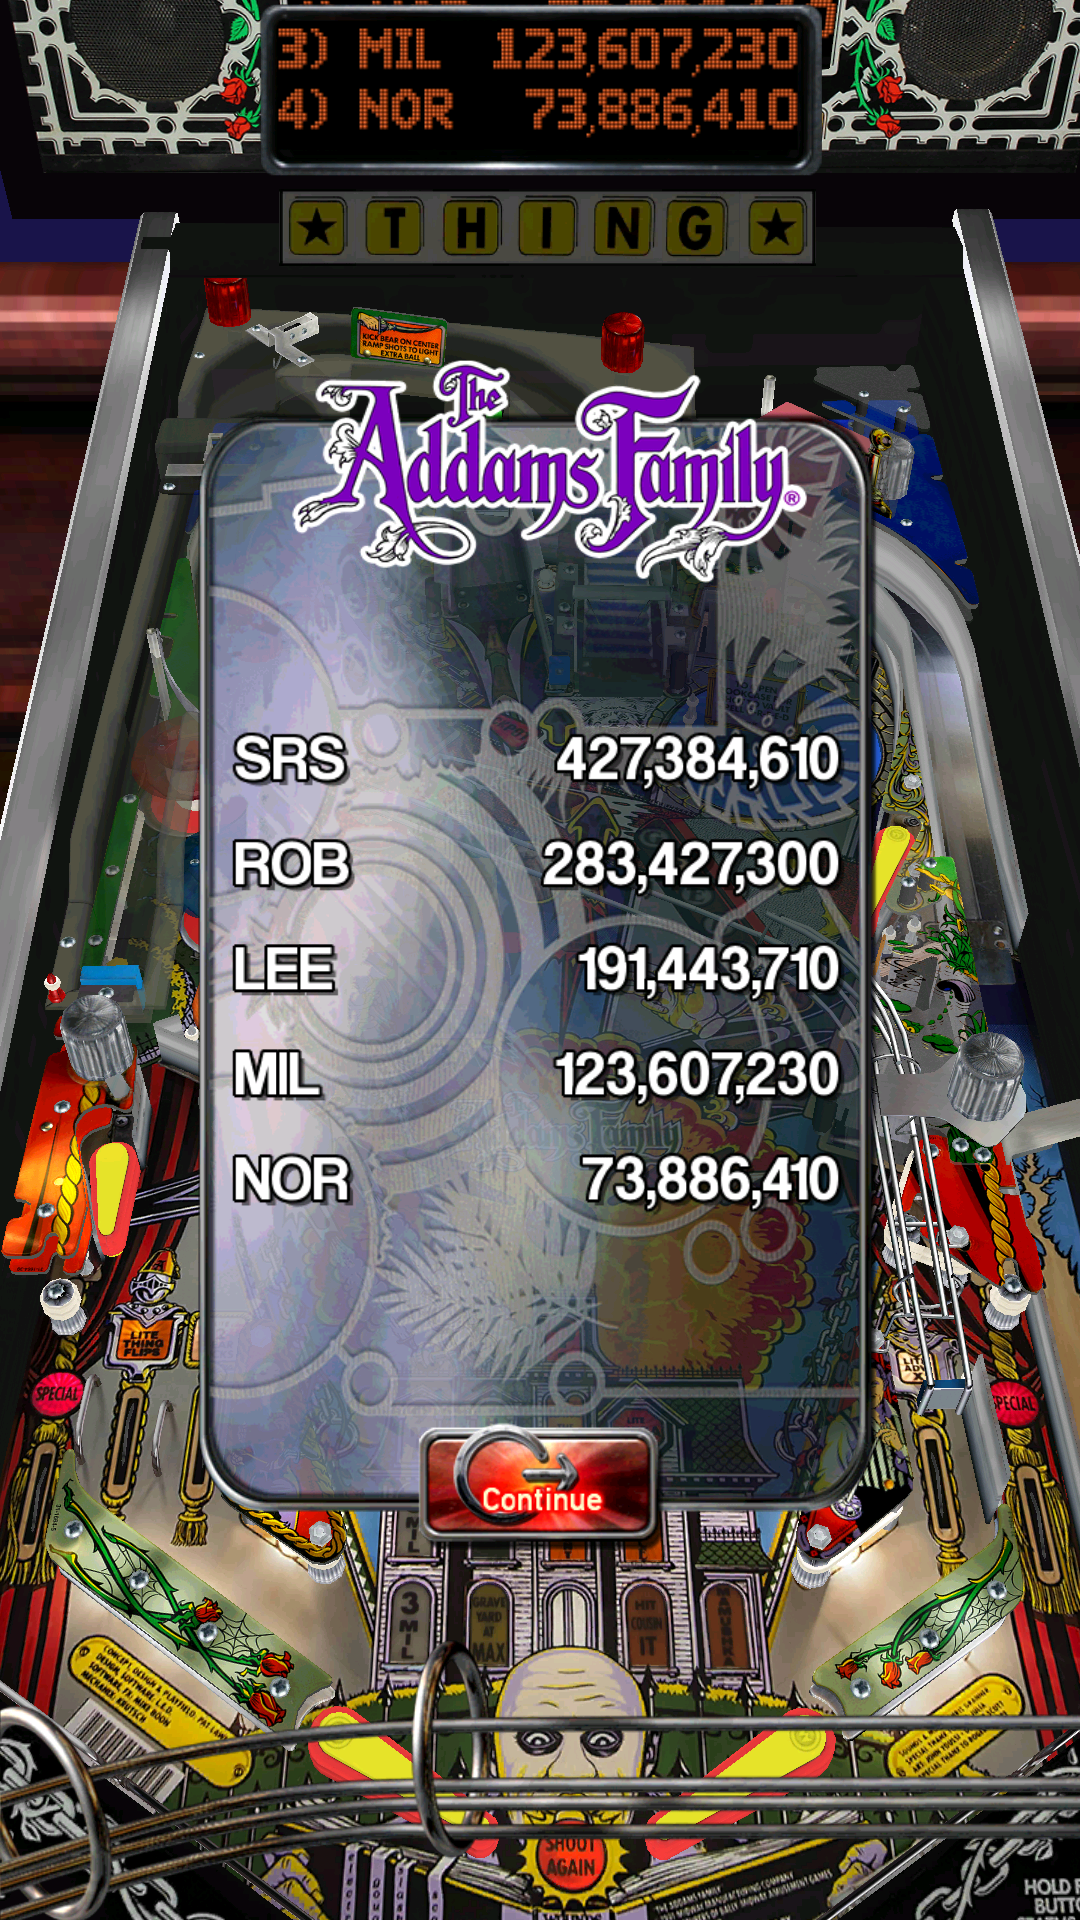 LeeJ07: Pinball Arcade: The Addams Family (Android) 191,443,710 points on 2015-06-06 06:27:32